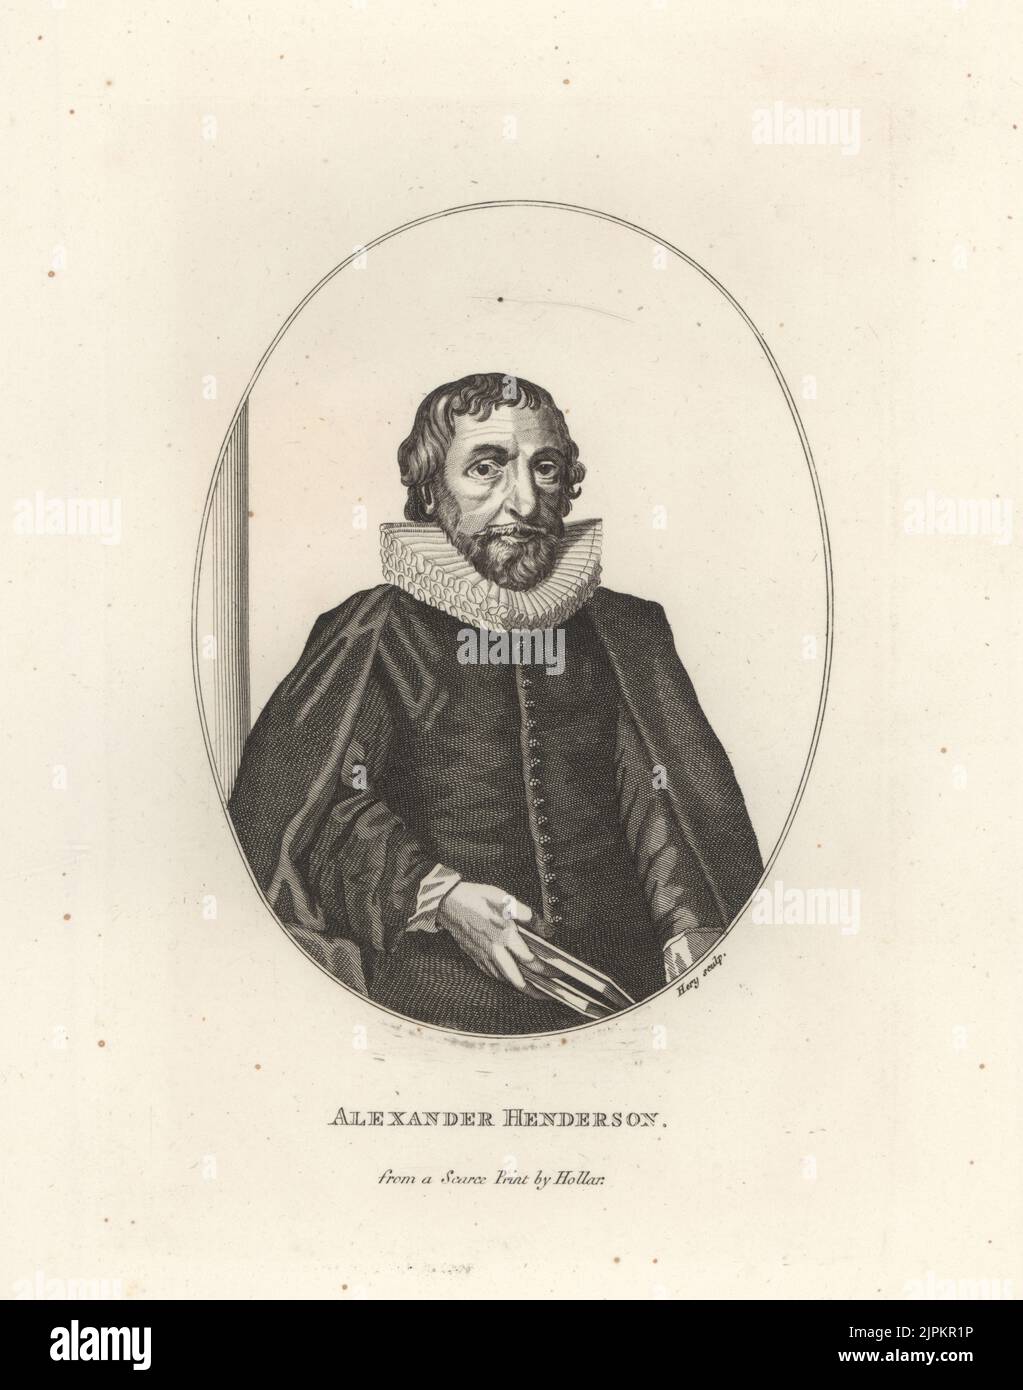 Alexander Henderson, Scottish theologian, one of the founders of the Reformed Church of Scotland, 1583-1646.. In ruff collar, doublet and cloak, holding a book. Copperplate engraving by Hery after a scarce print by Wenceslaus Hollar from a painting by Anthony van Dyke from Samuel Woodburn’s Gallery of Rare Portraits Consisting of Original Plates, George Jones, 102 St Martin’s Lane, London, 1816. Stock Photo